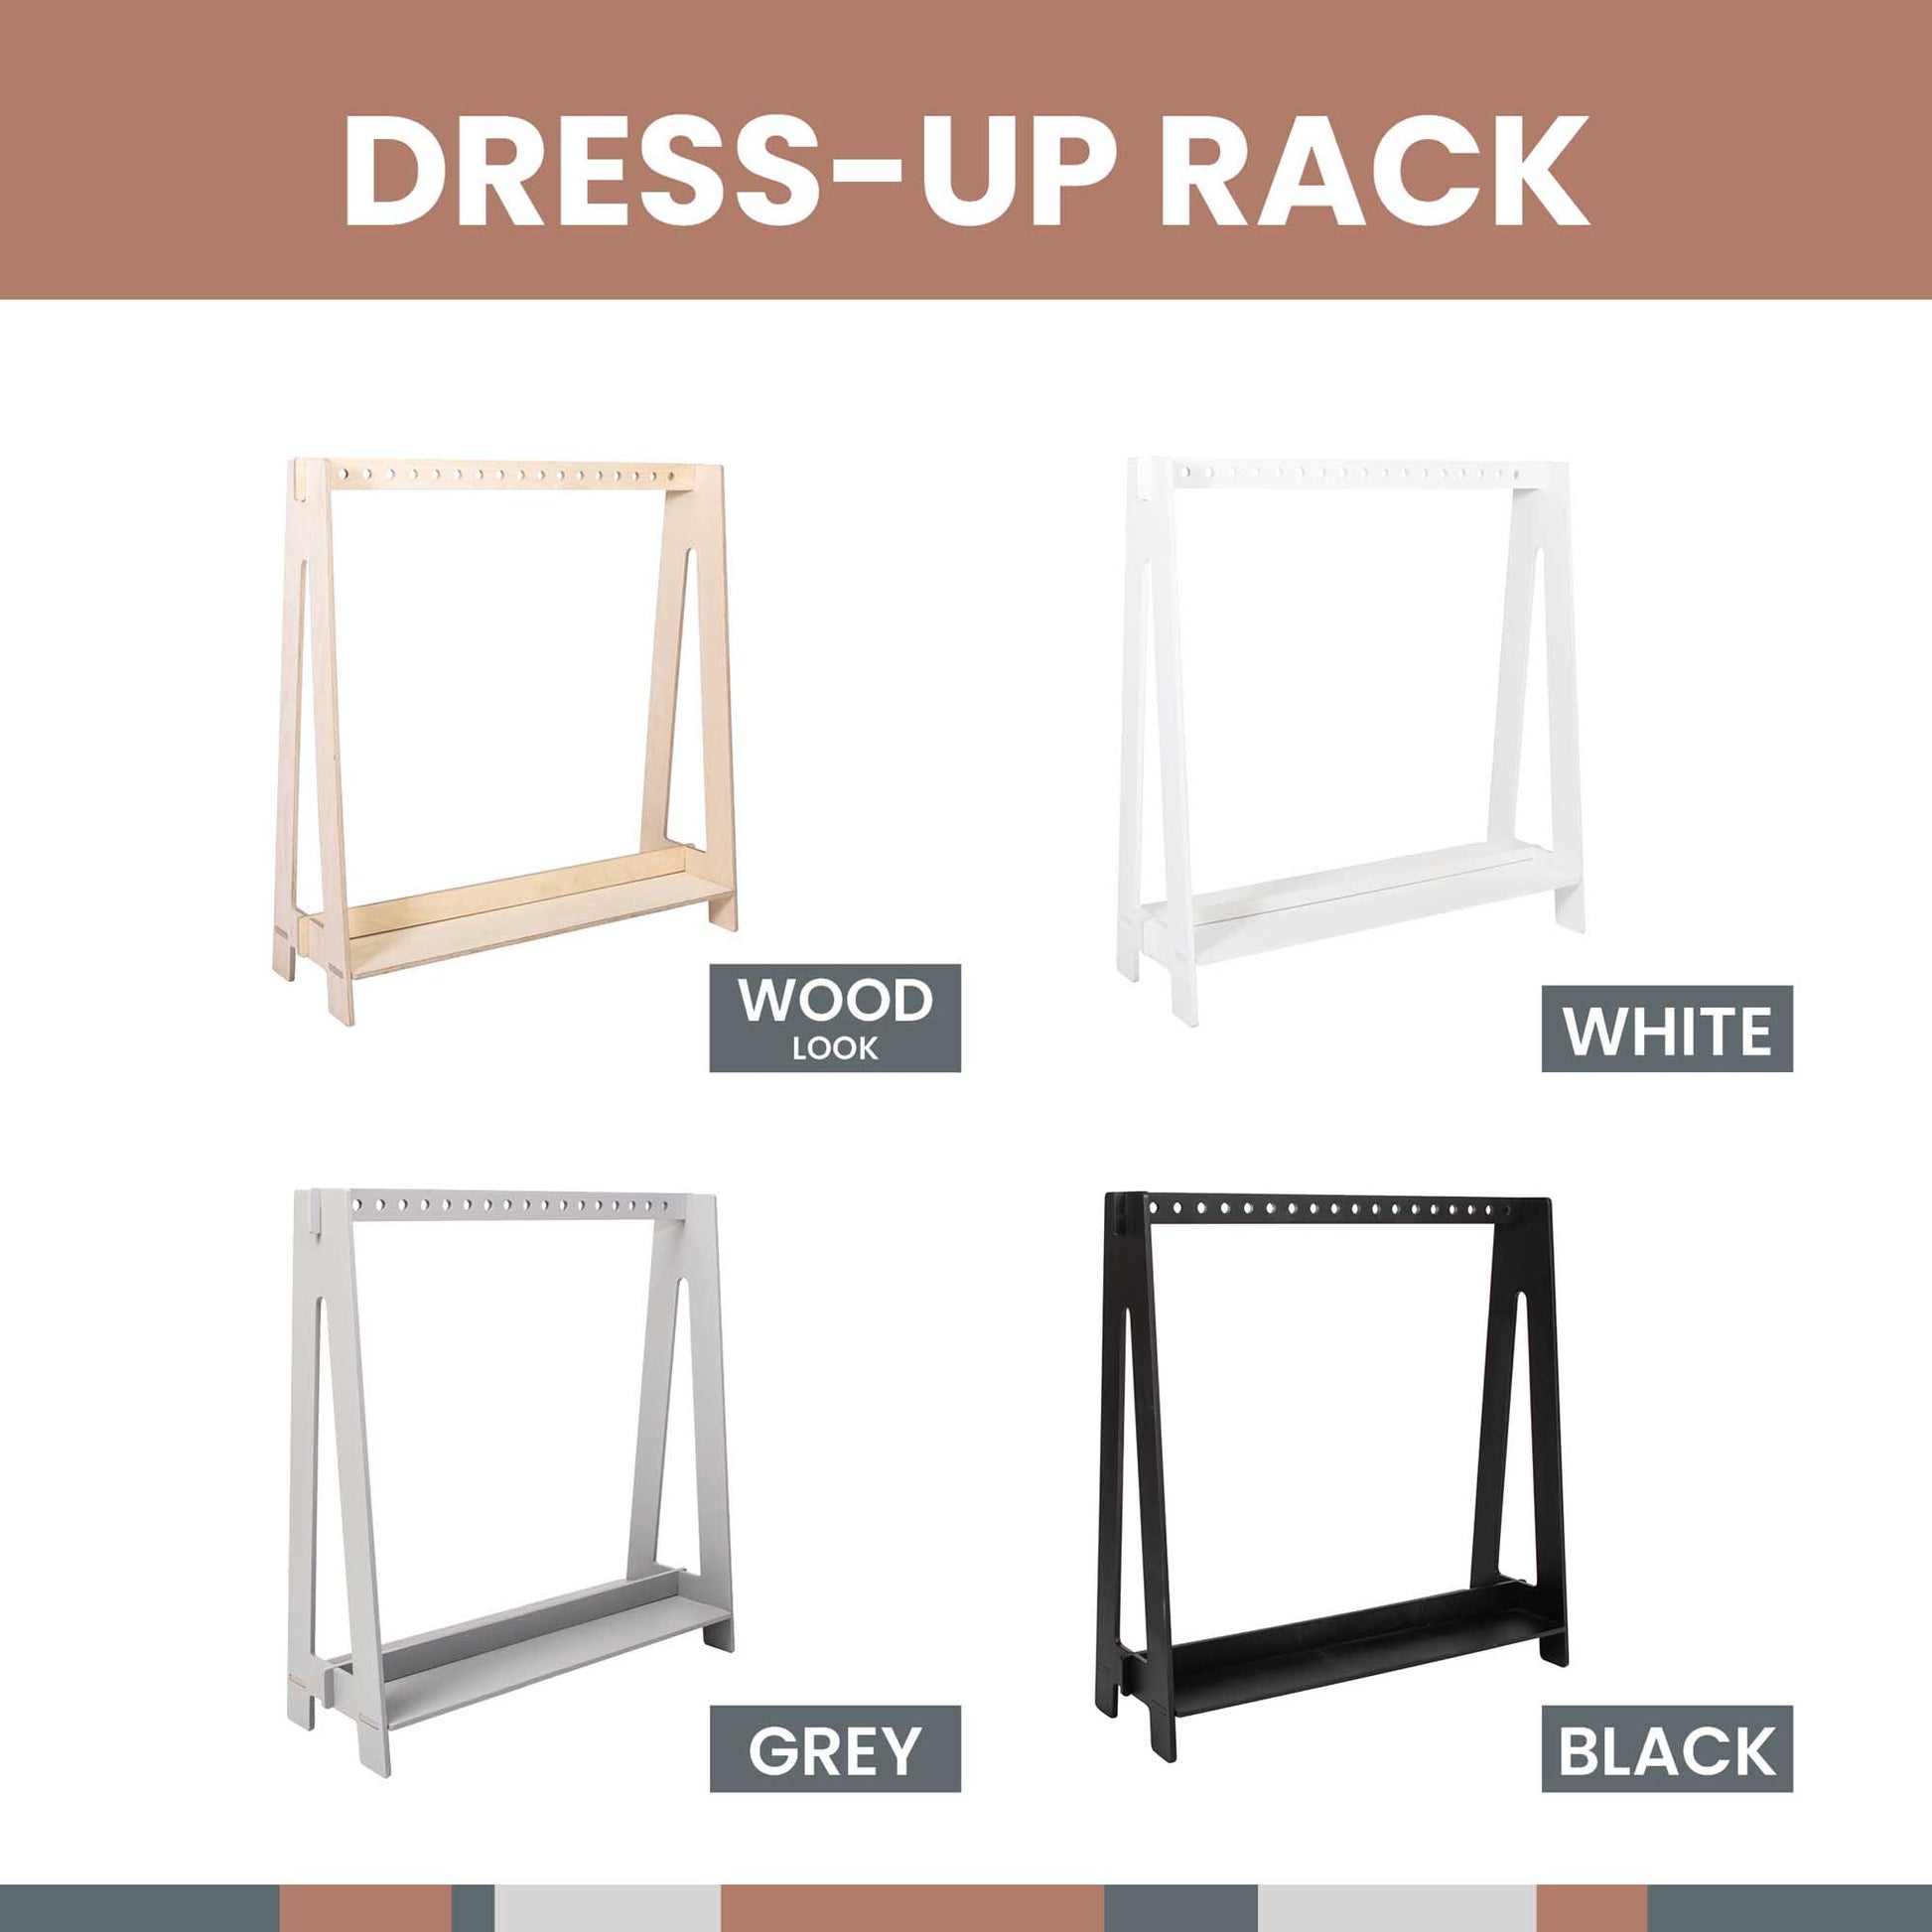 Transform your A-frame kids' clothing rack into a stylish wardrobe with vibrant color options, offering both practical storage and a fashionable display solution.